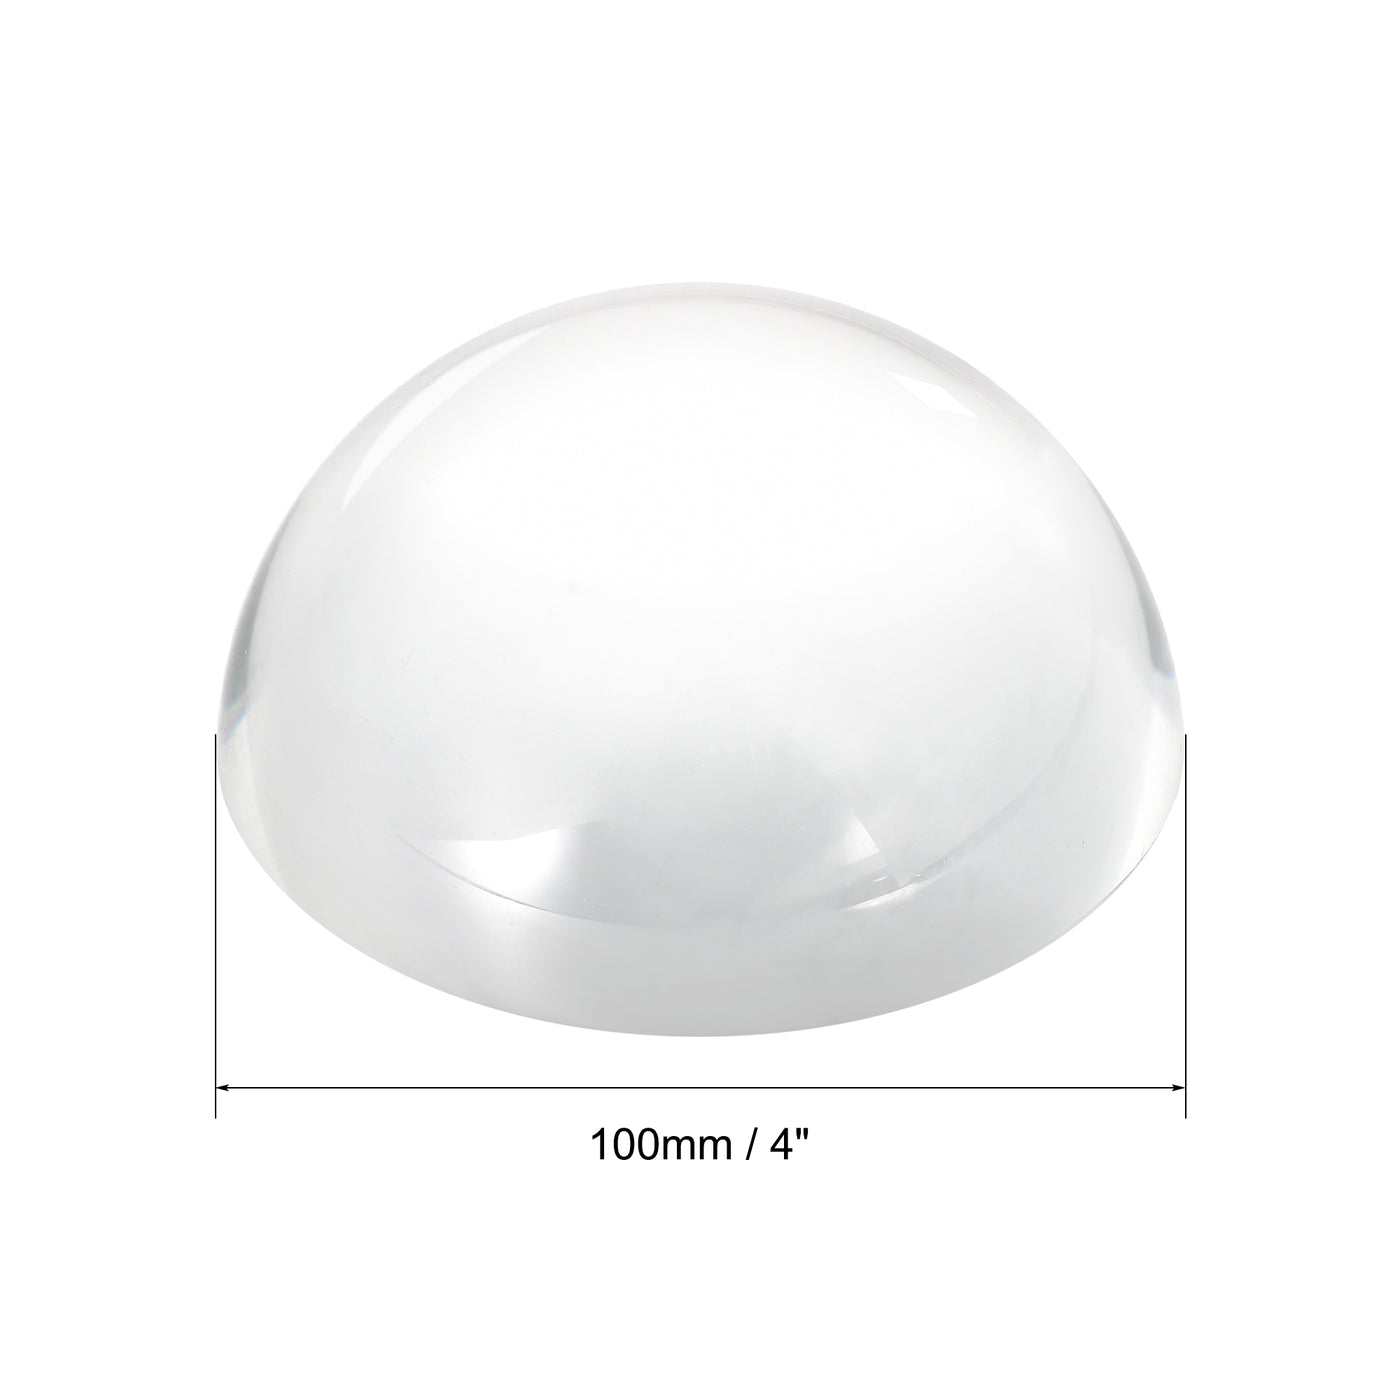 uxcell Uxcell 4" Dome Magnifier 5X Acrylic Half Ball Reading Magnifying Glass with Polishing Pouch